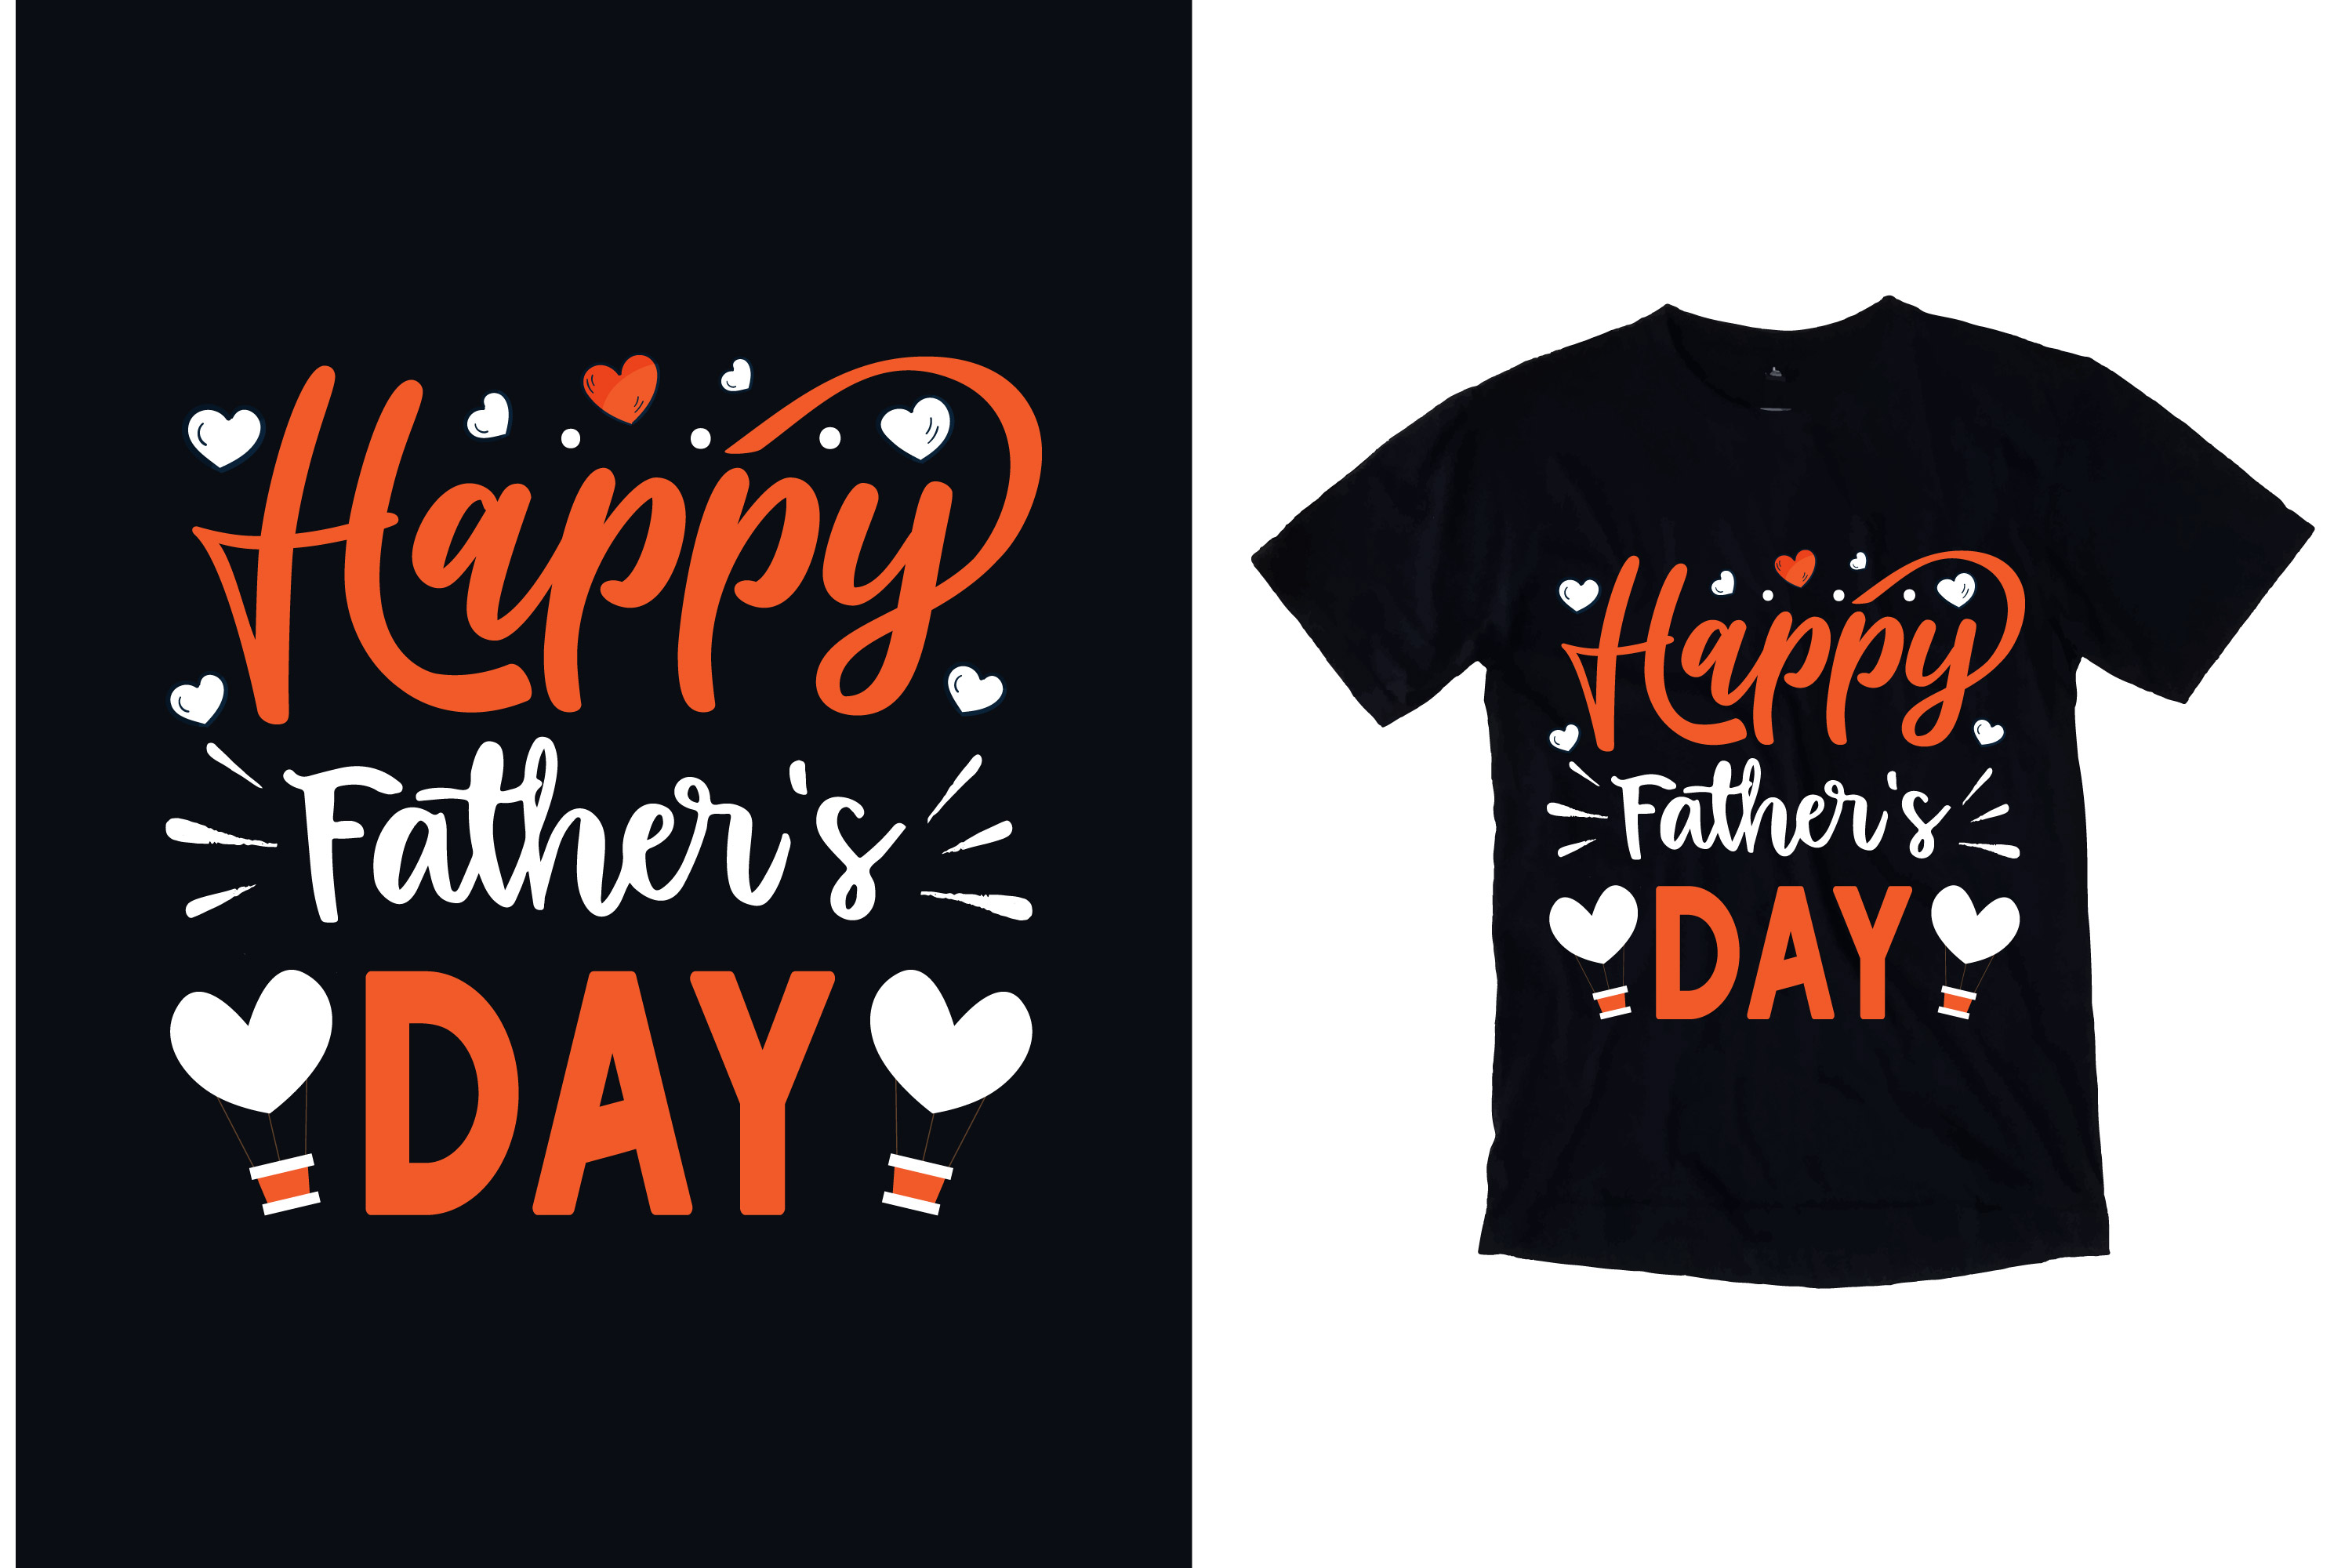 Image of a black t-shirt with a gorgeous print on the theme of love for your father.